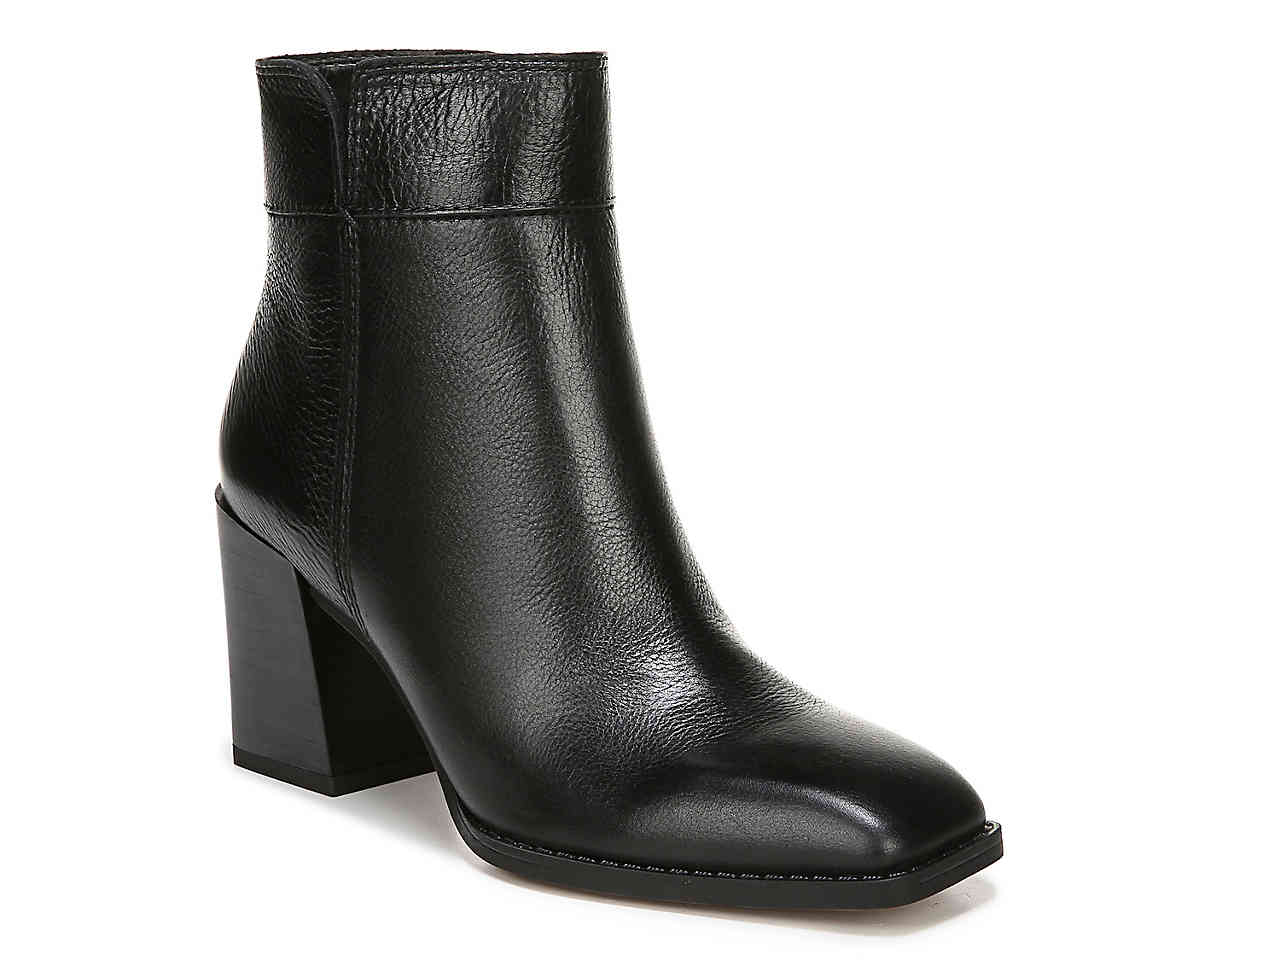 The Basic Black Booties You Absolutely Need In Your Life